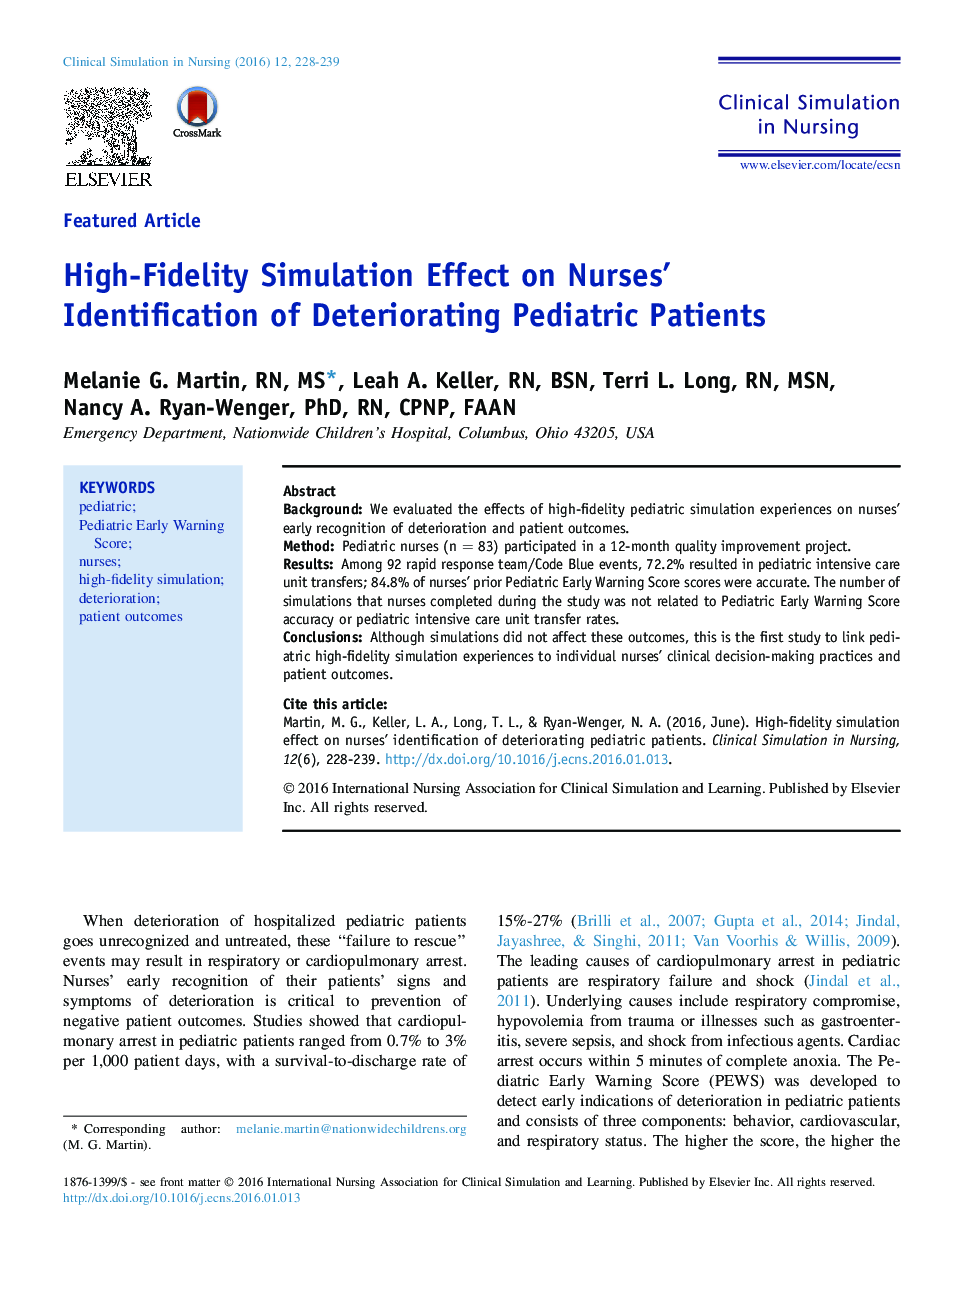 High-Fidelity Simulation Effect on Nurses' Identification of Deteriorating Pediatric Patients